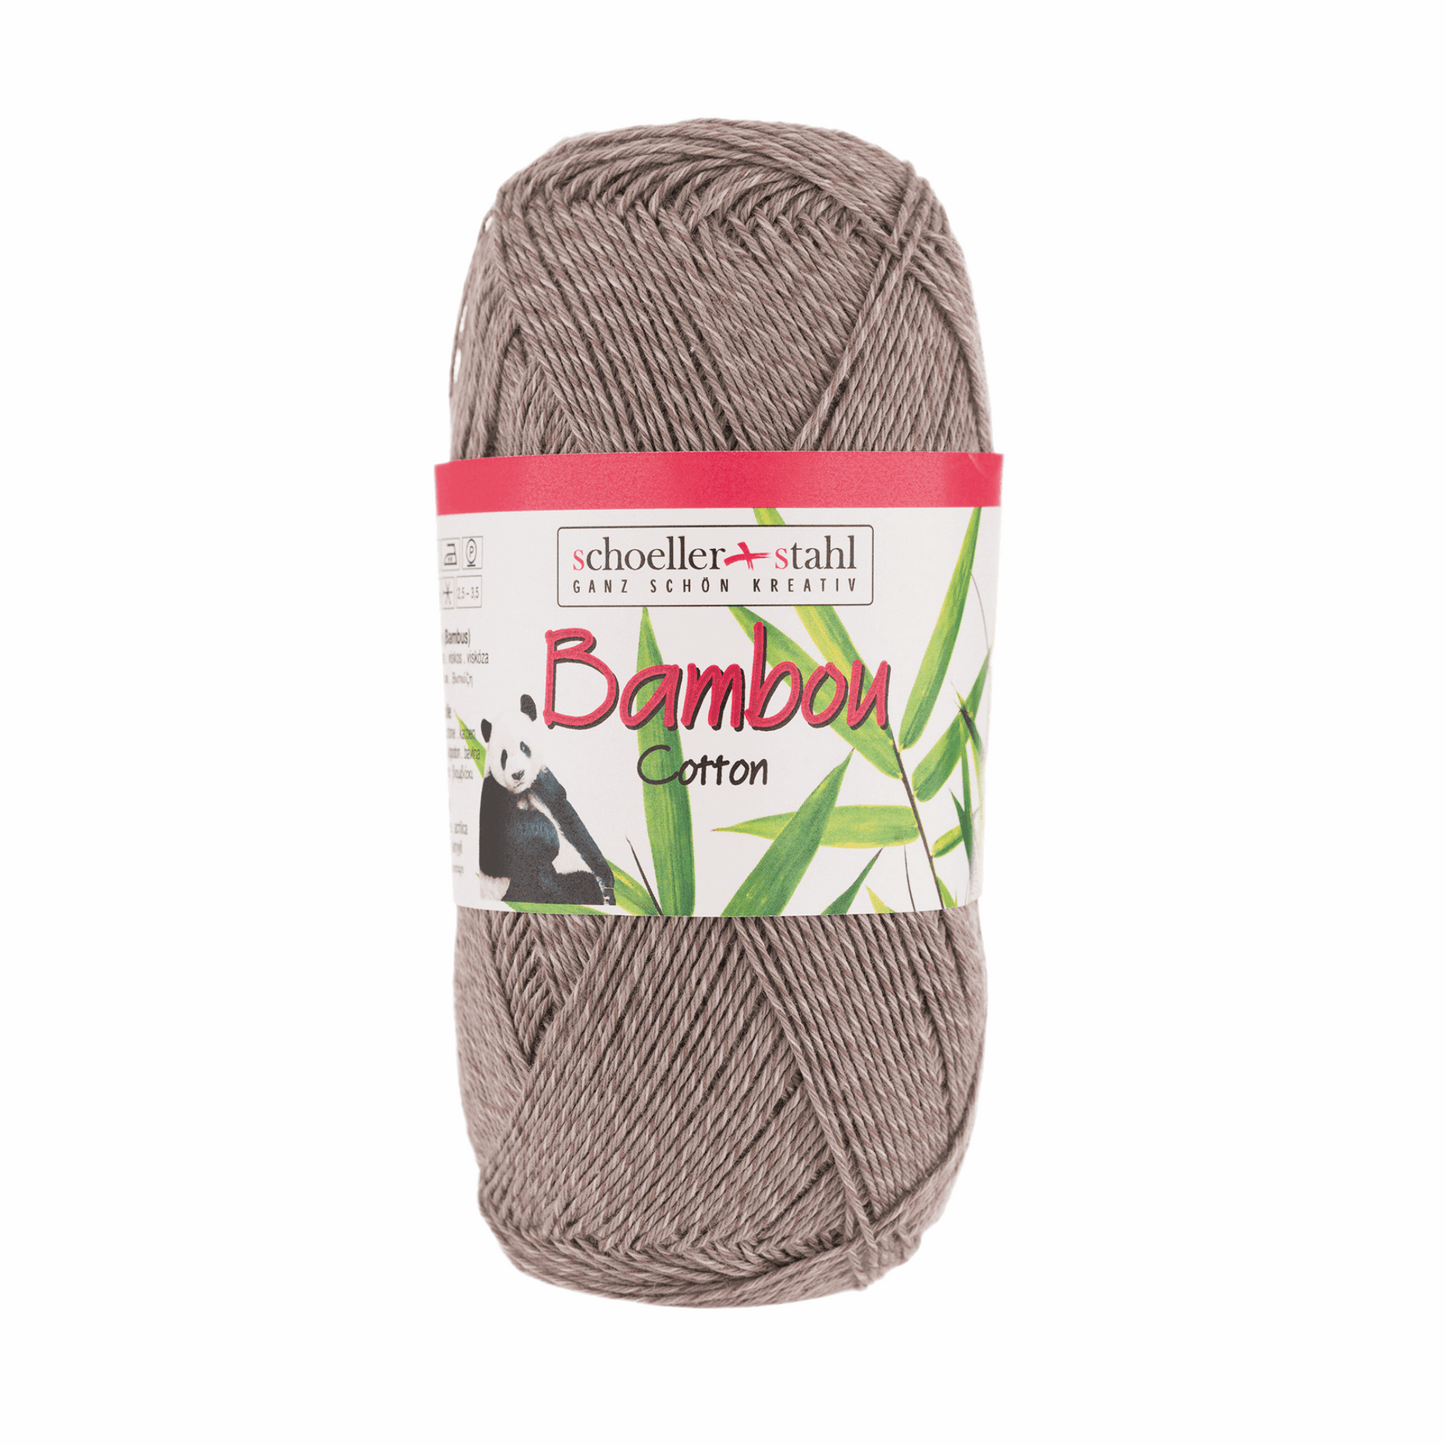 Bambou Cotton 100g, 90286, Farbe 6, taupe